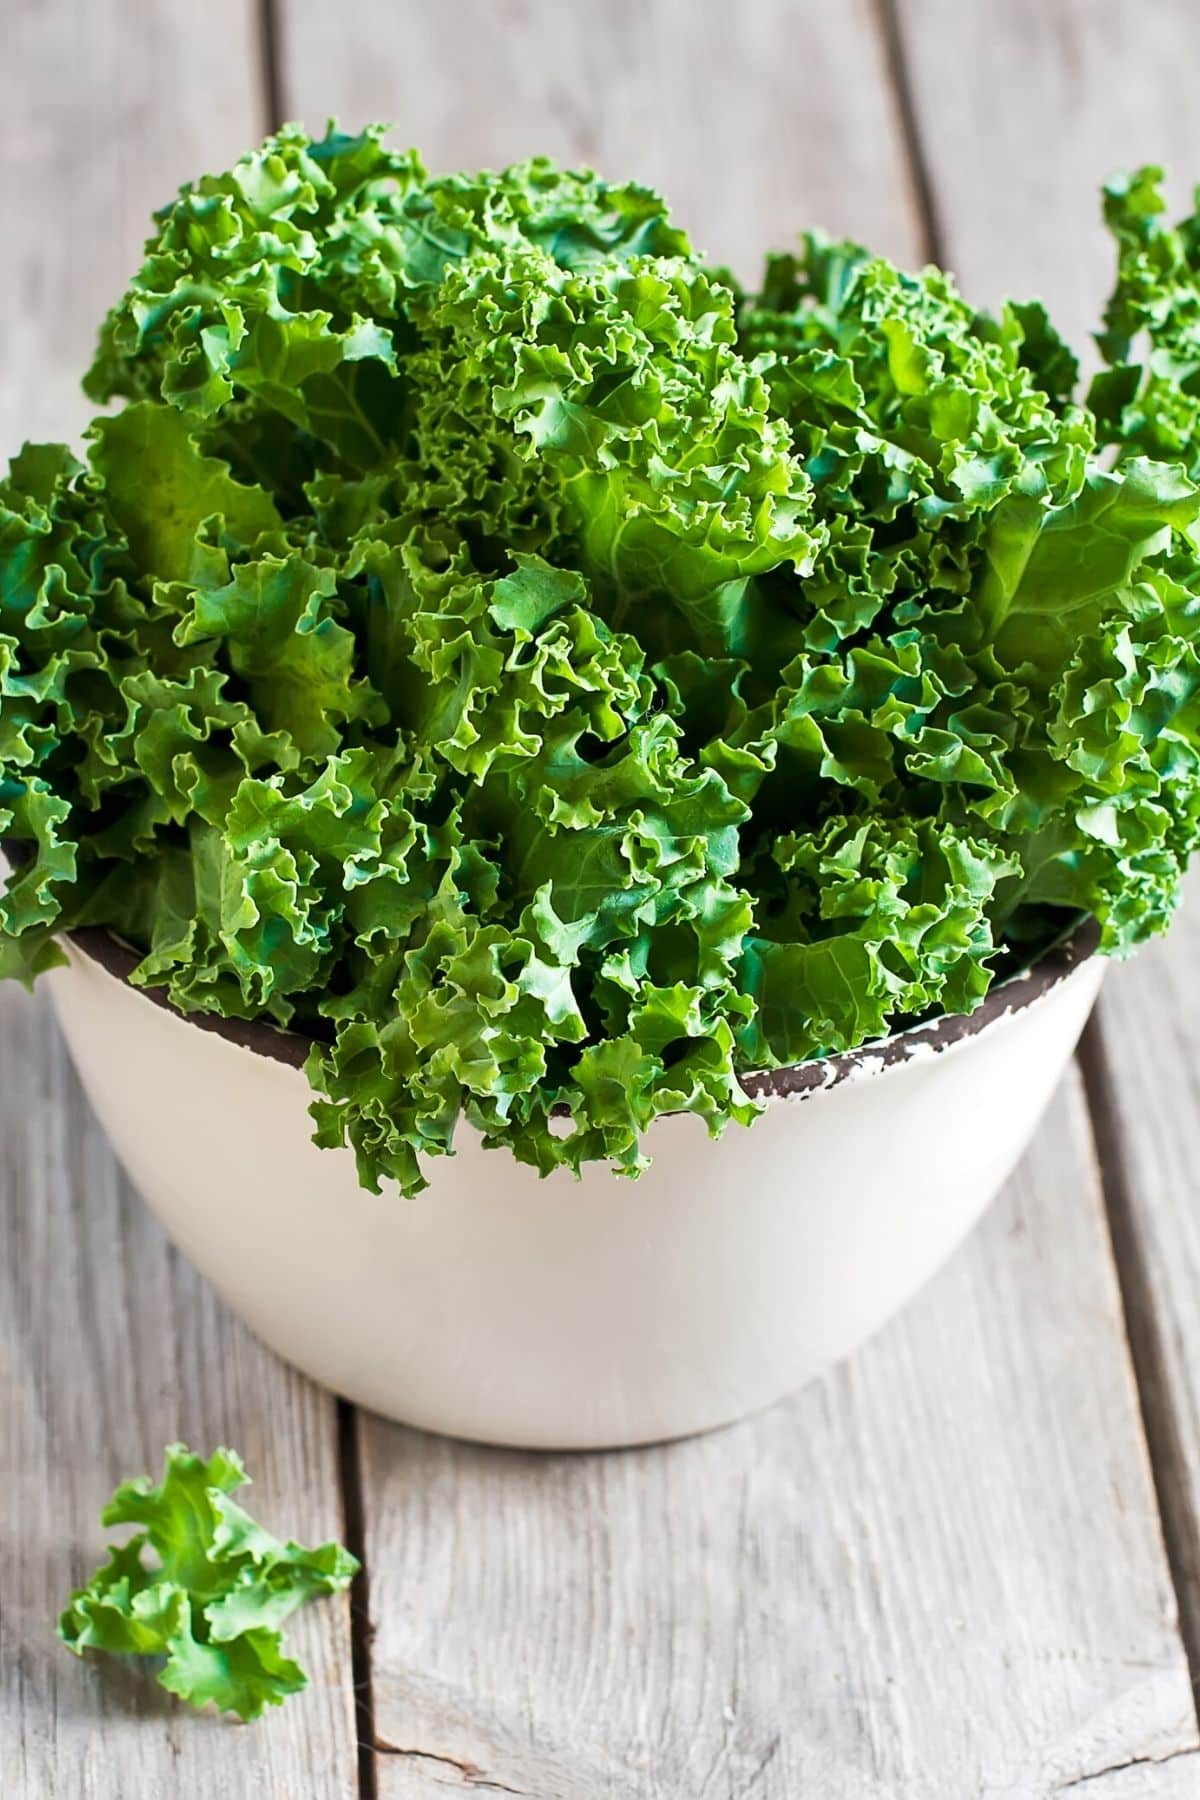 https://www.cleaneatingkitchen.com/wp-content/uploads/2022/02/kale-in-a-white-bowl-on-a-table.jpg